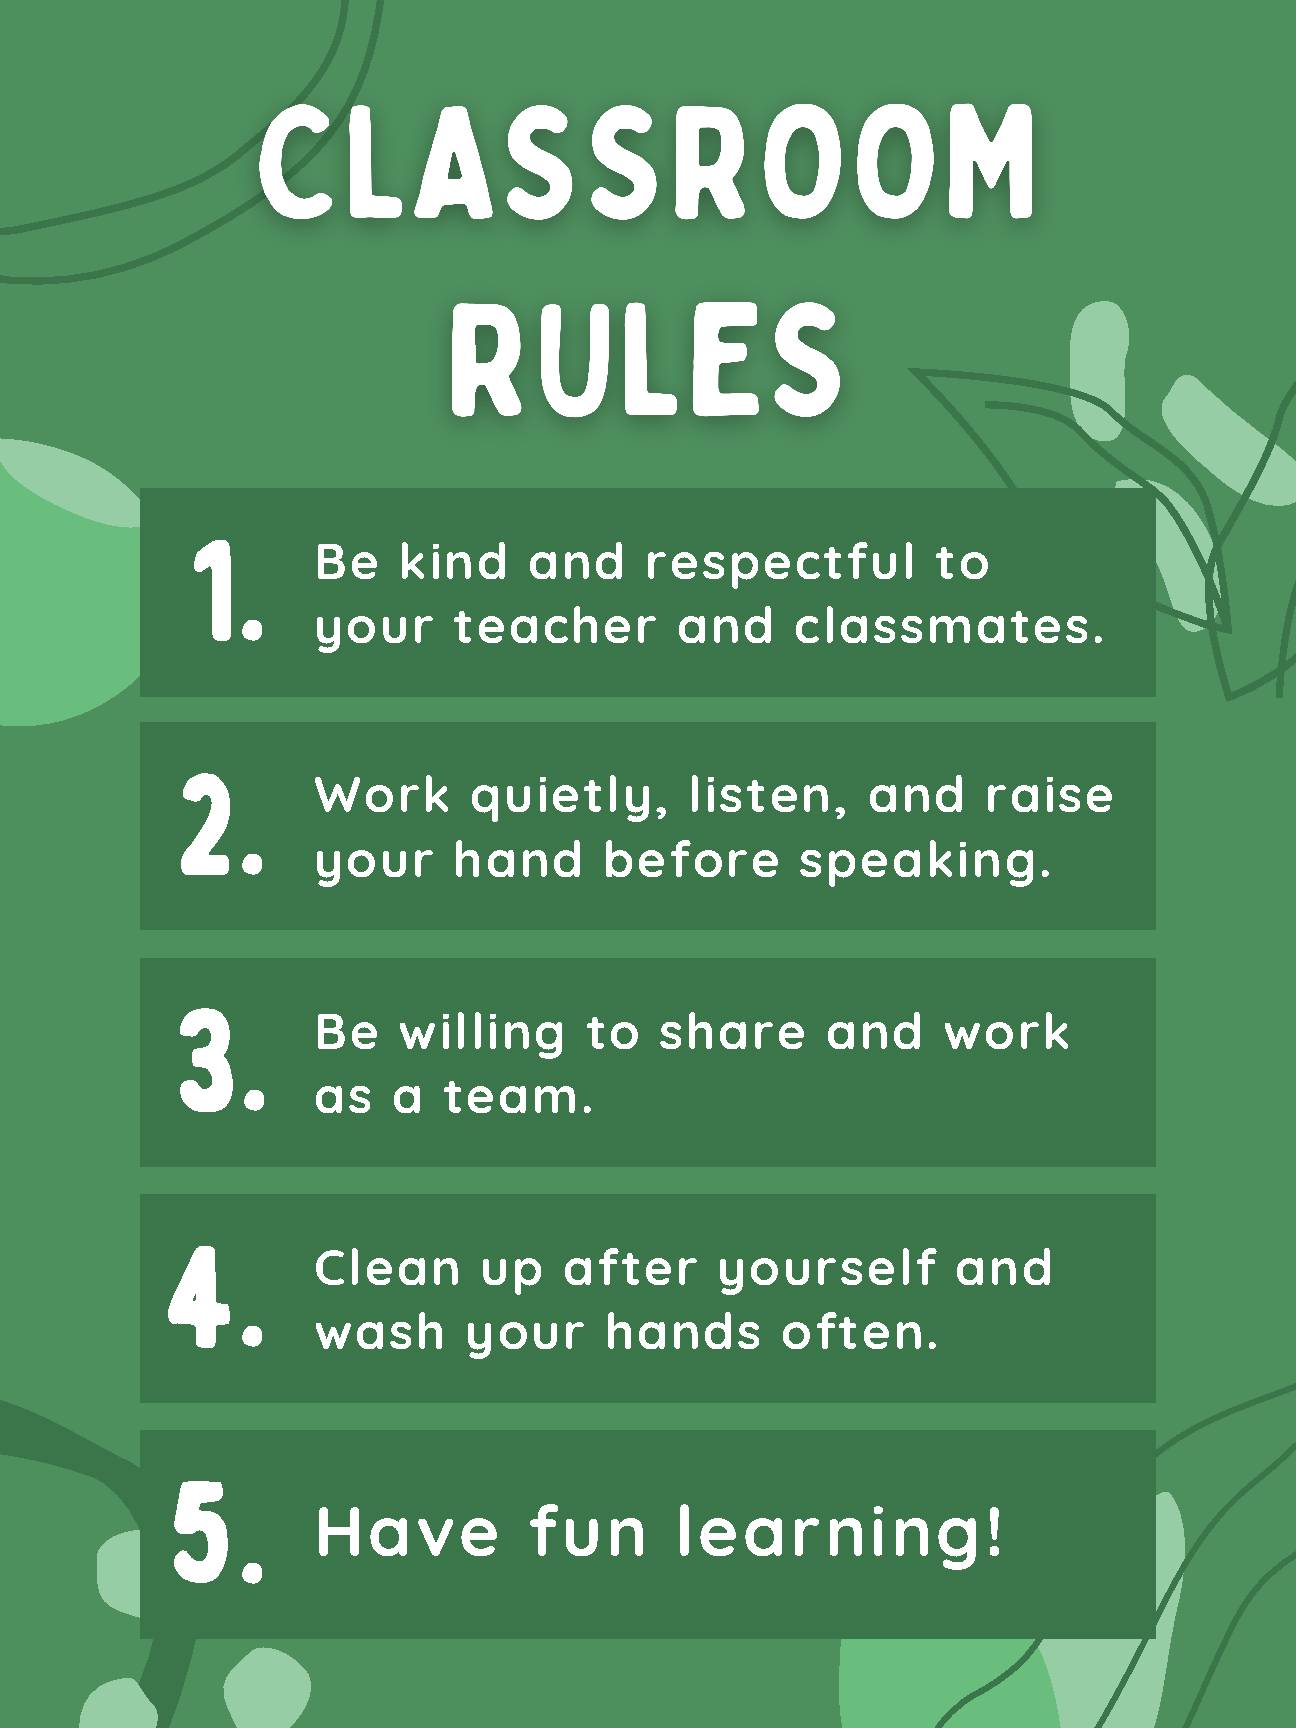 Classroom Rules Poster's featured image